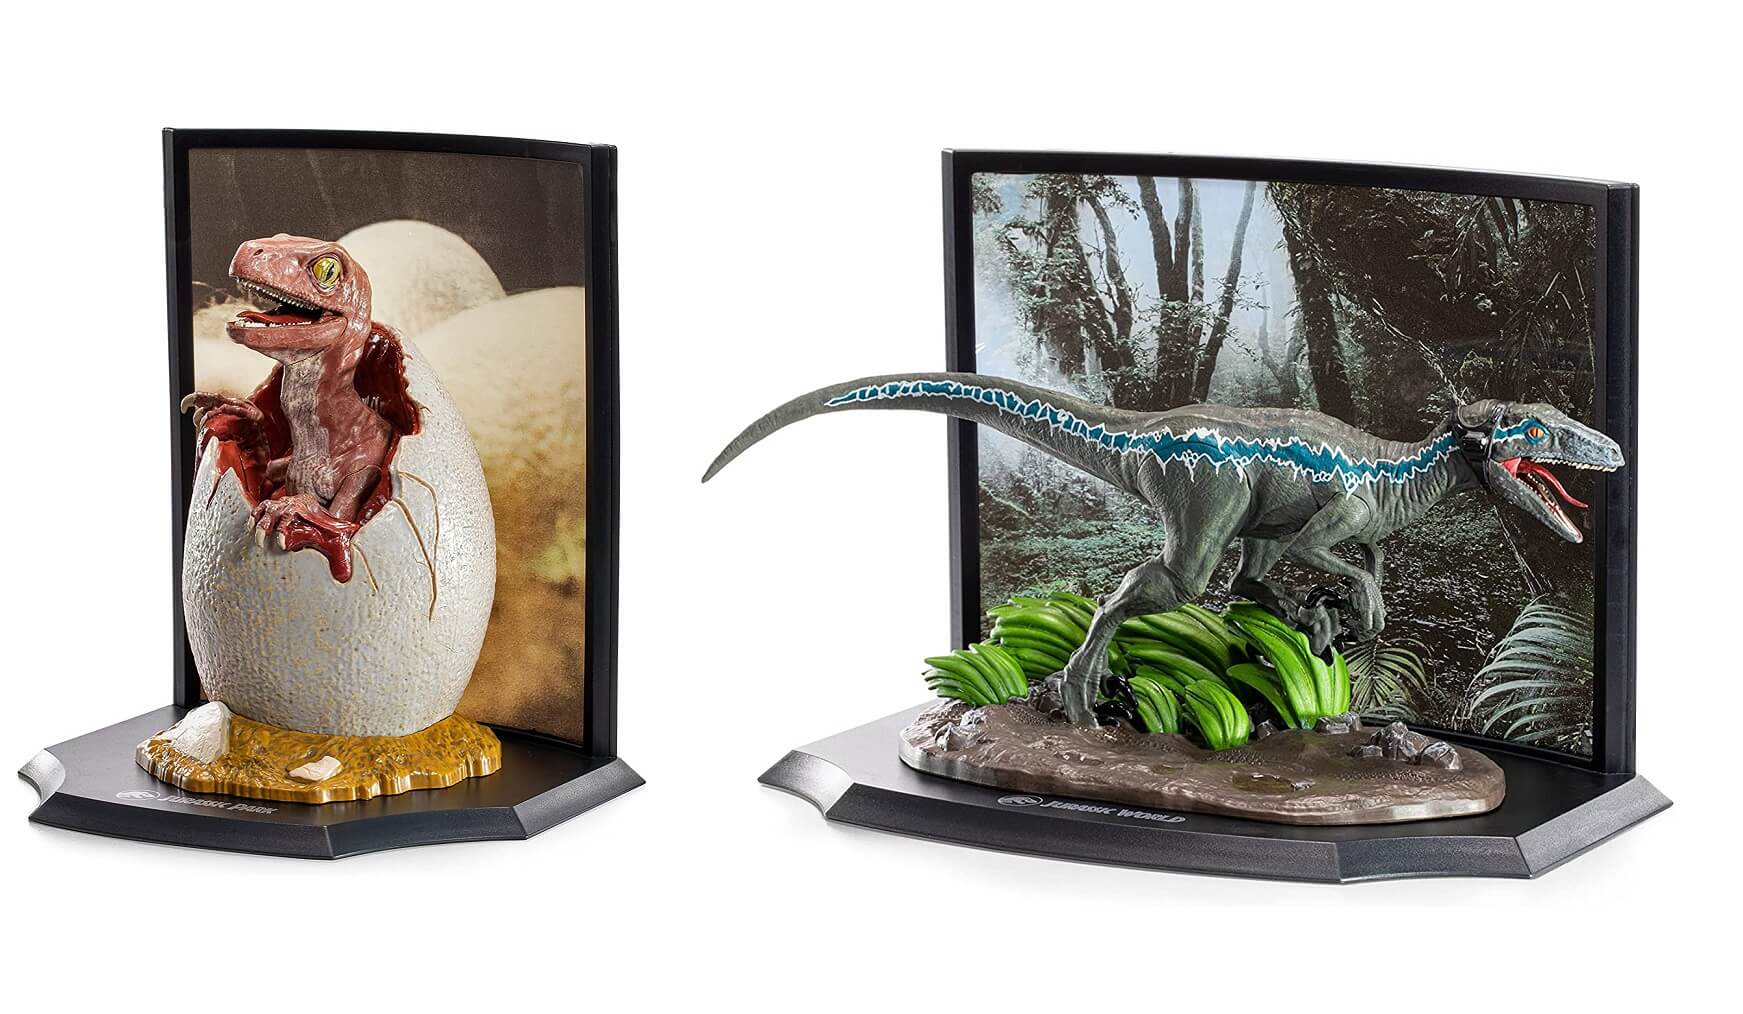 Noble Collection’s New “Toyllectible Treasures” Line Features New ‘Jurassic’ Collectibles!